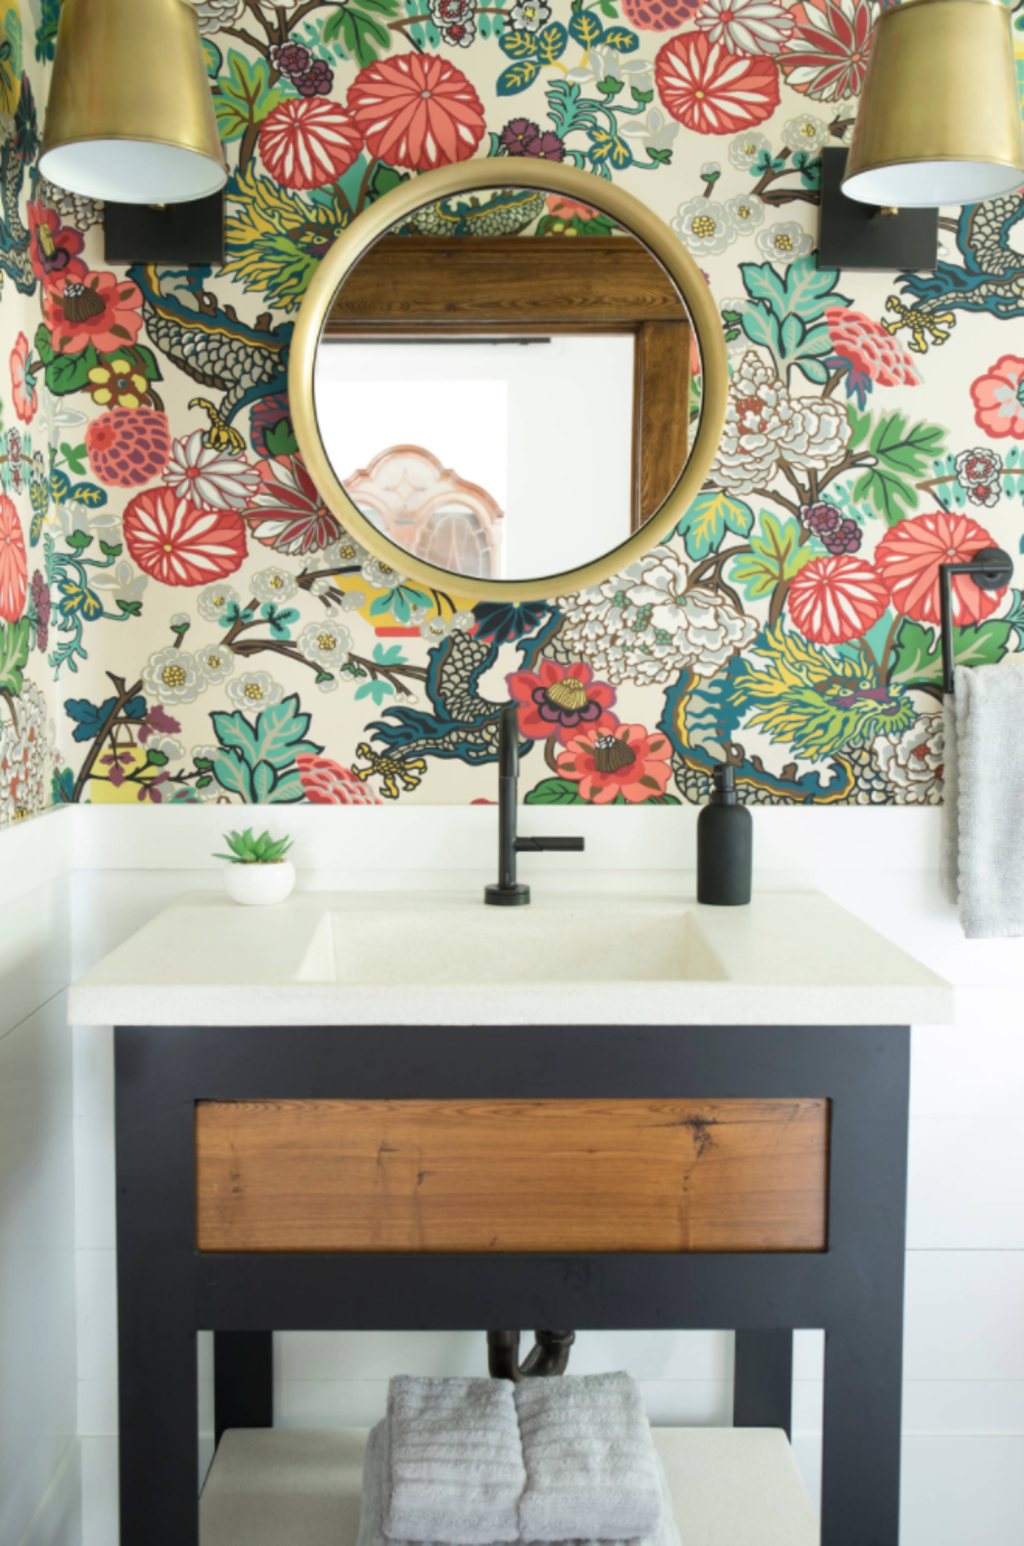 How To Choose A Bathroom Mirror You Ll Love, What Size Mirror For A 30 Vanity